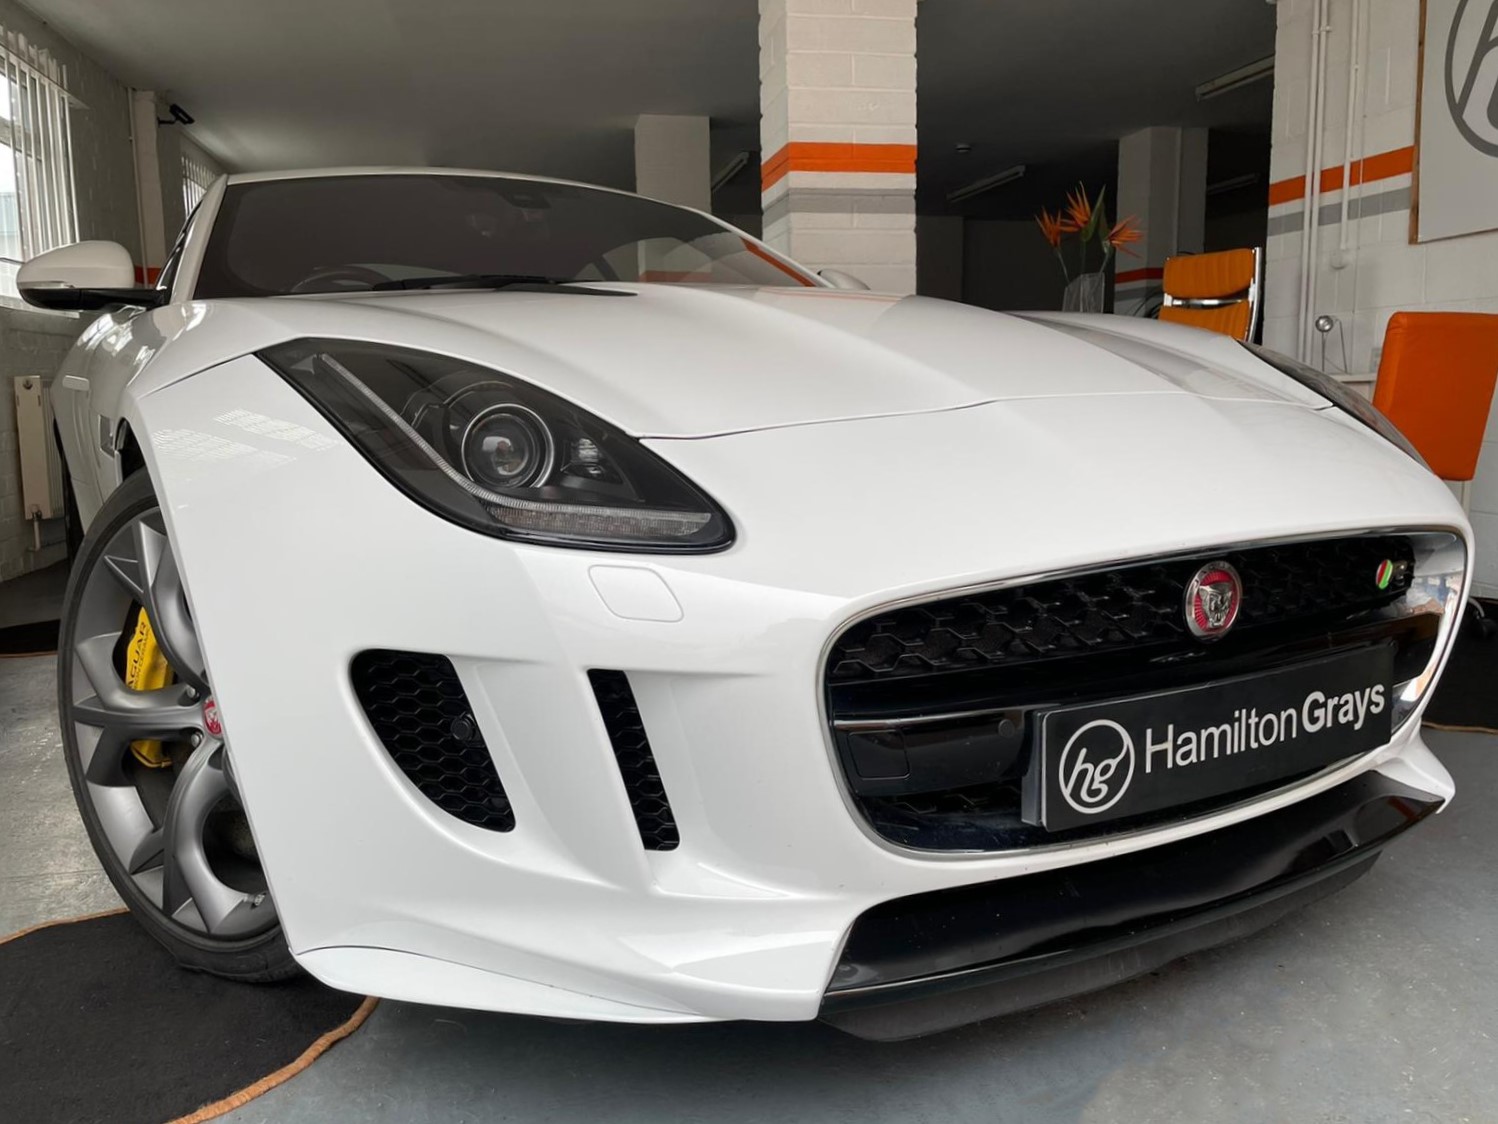 2016 (16) Jaguar F Type 5.0 V8 ‘R’ [550] QS Coupe. Finished in Polaris White with Full Black Leather Interior. Only 25k. FJSH.. Ceramics!  (SOLD)